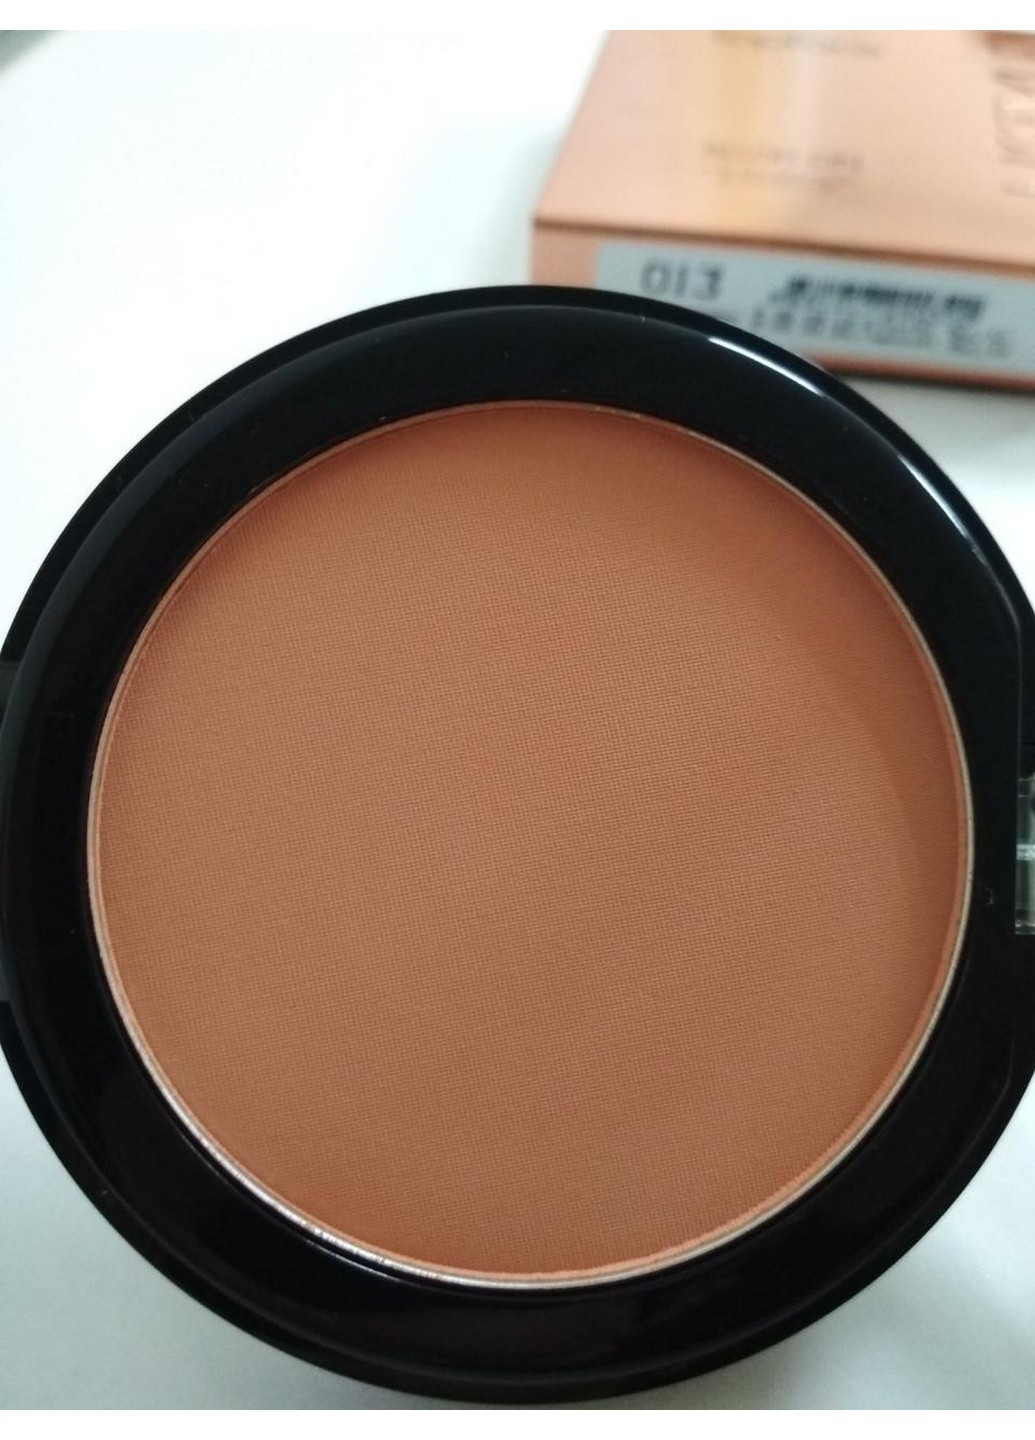 Румяна INSTYLE Blush On РТ354 №13 м TopFace (257840650)